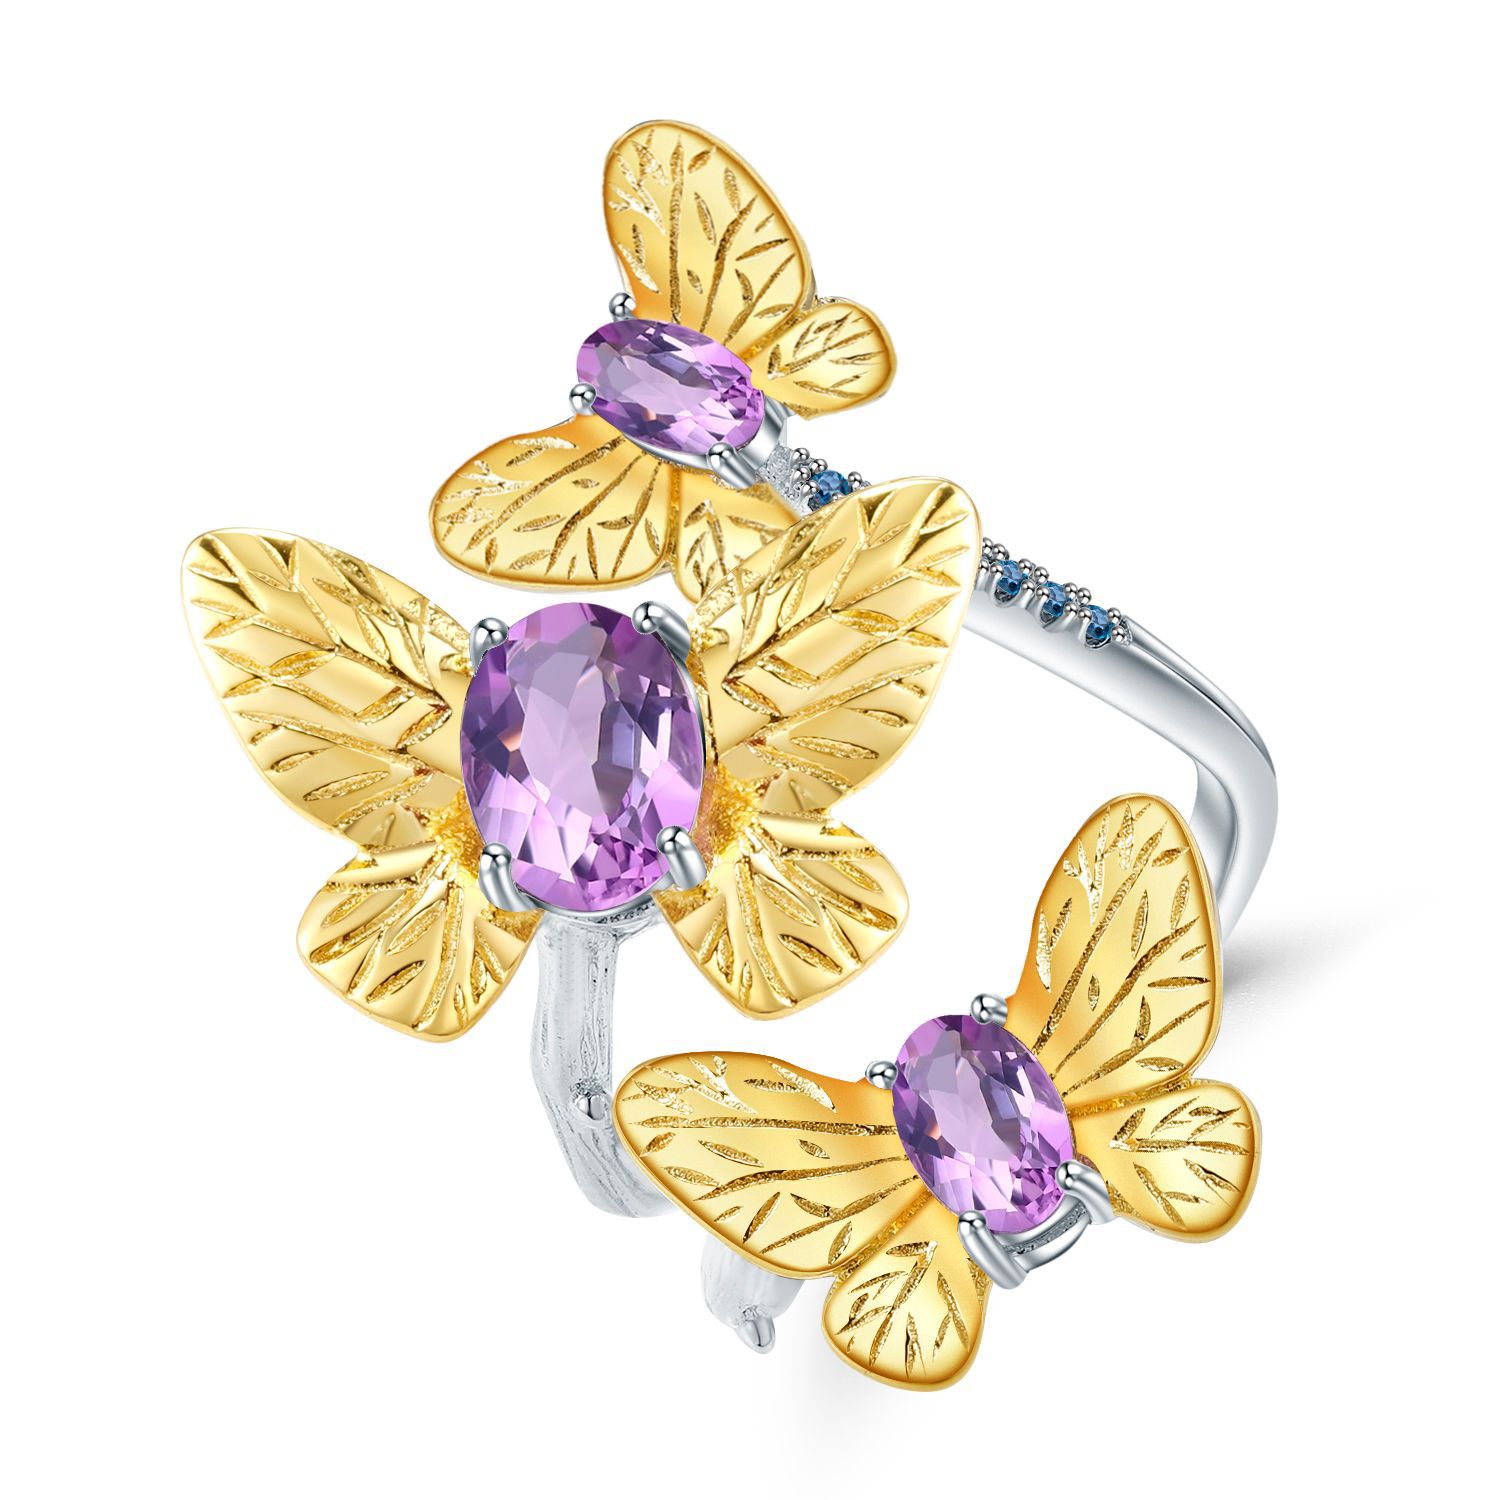 The Butterfly Dances S925 Silver Natural Amethyst Open Ring-BlingRunway